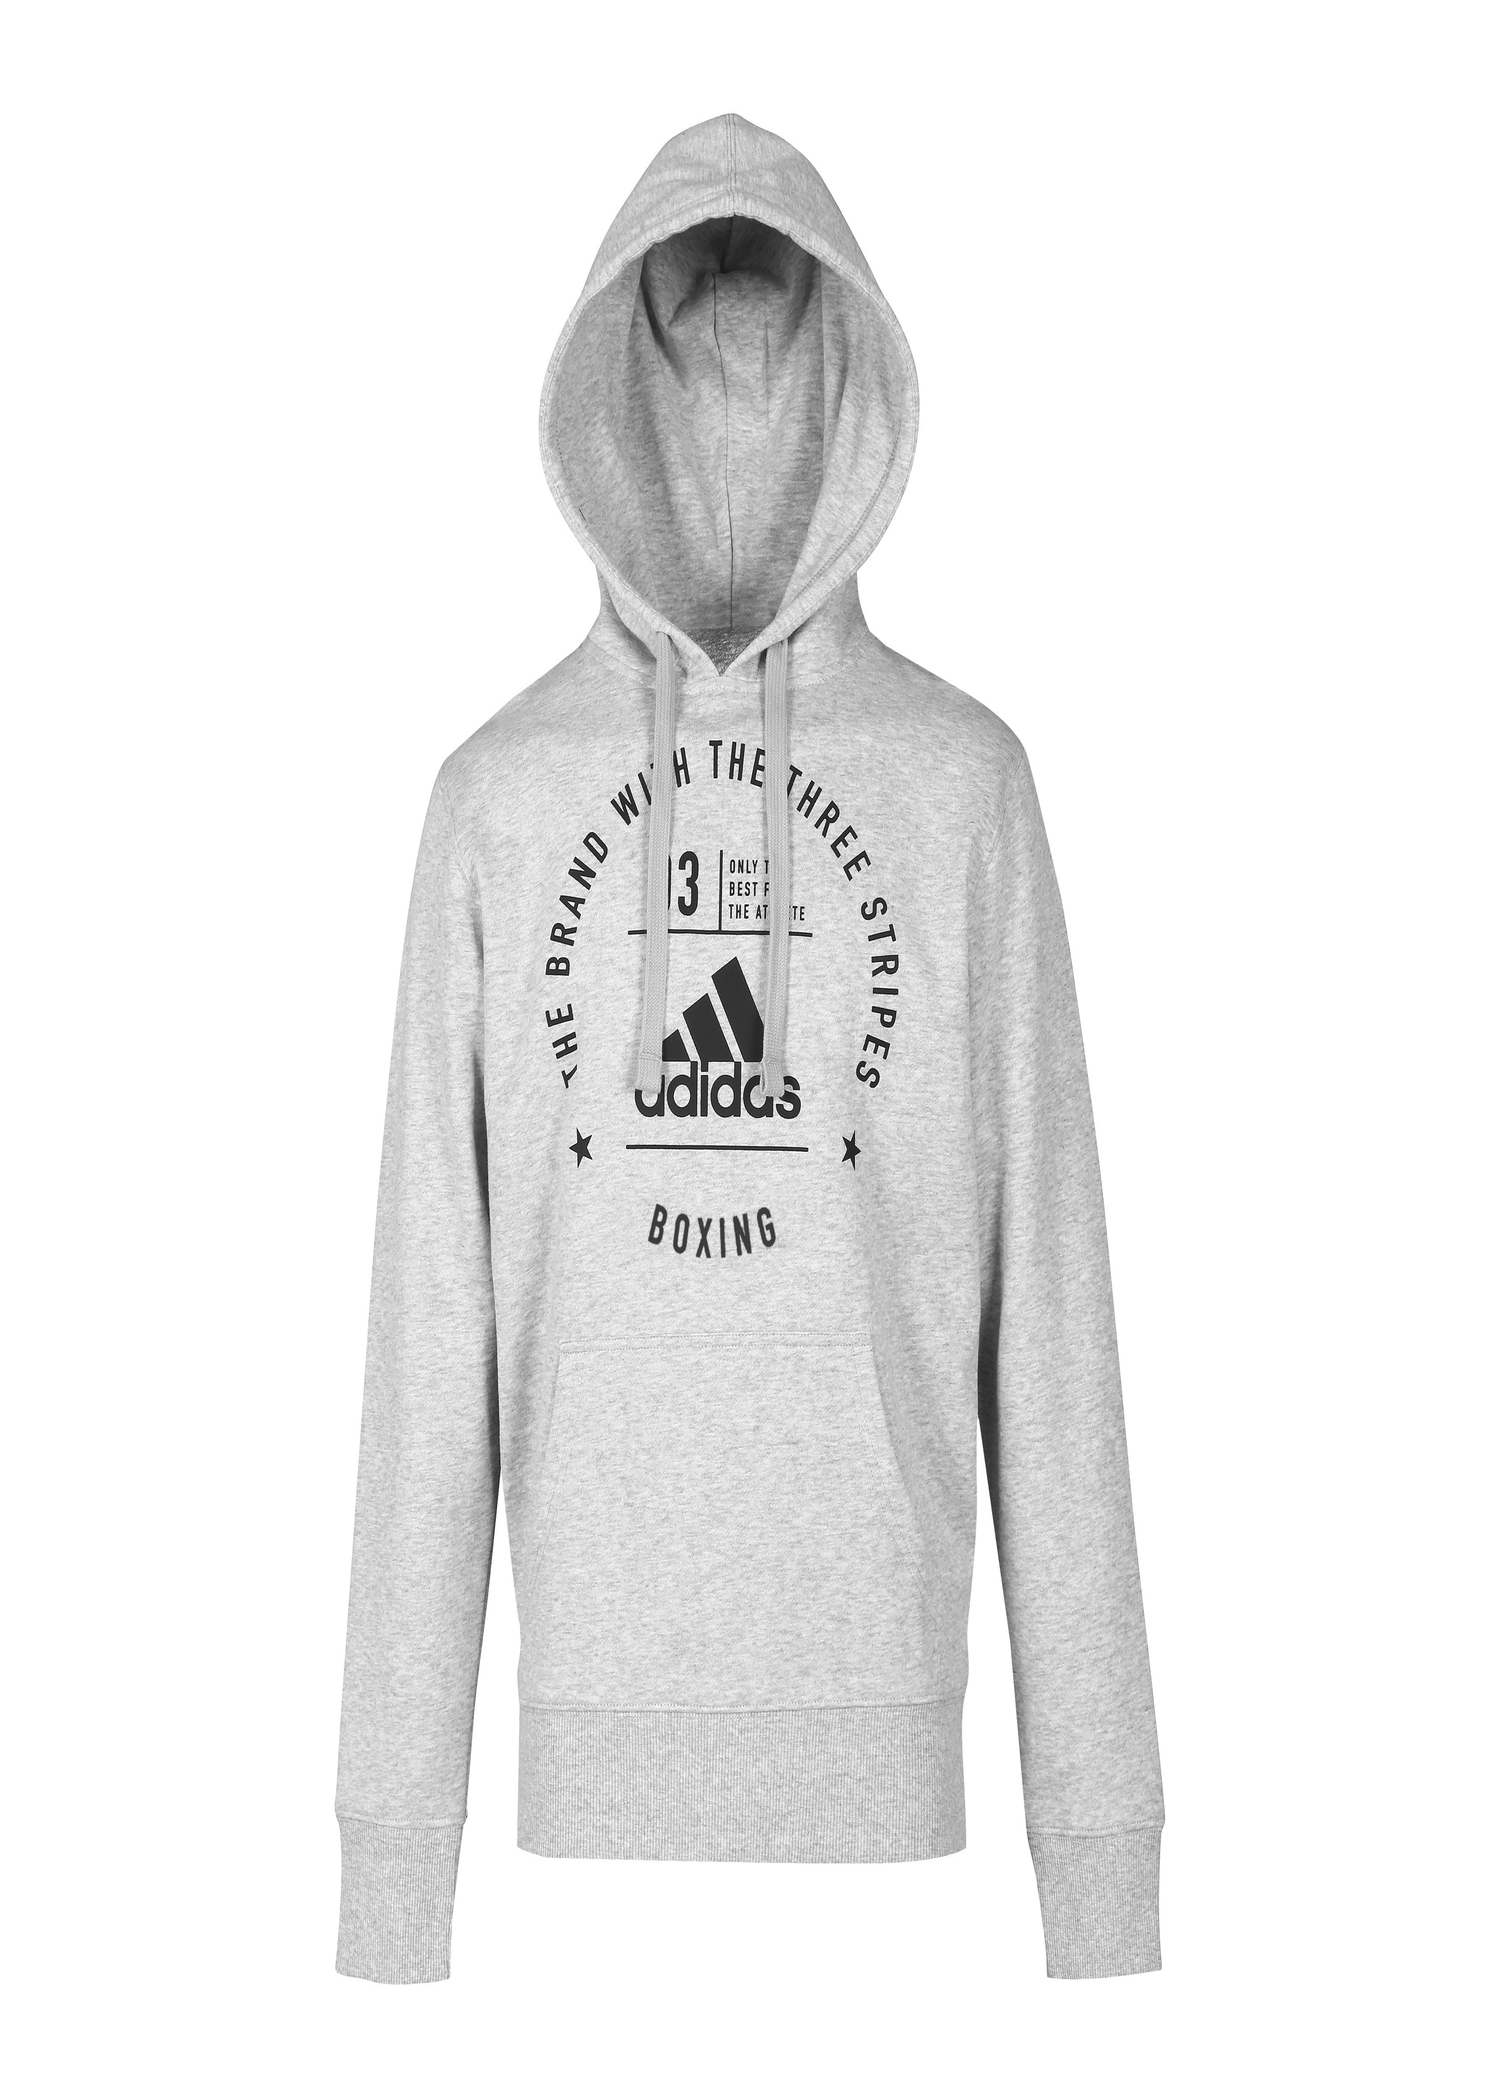 Adidas Boxing Community Hoodie- Unisex — for for Work FightersShop Man, Gym, Woman, 